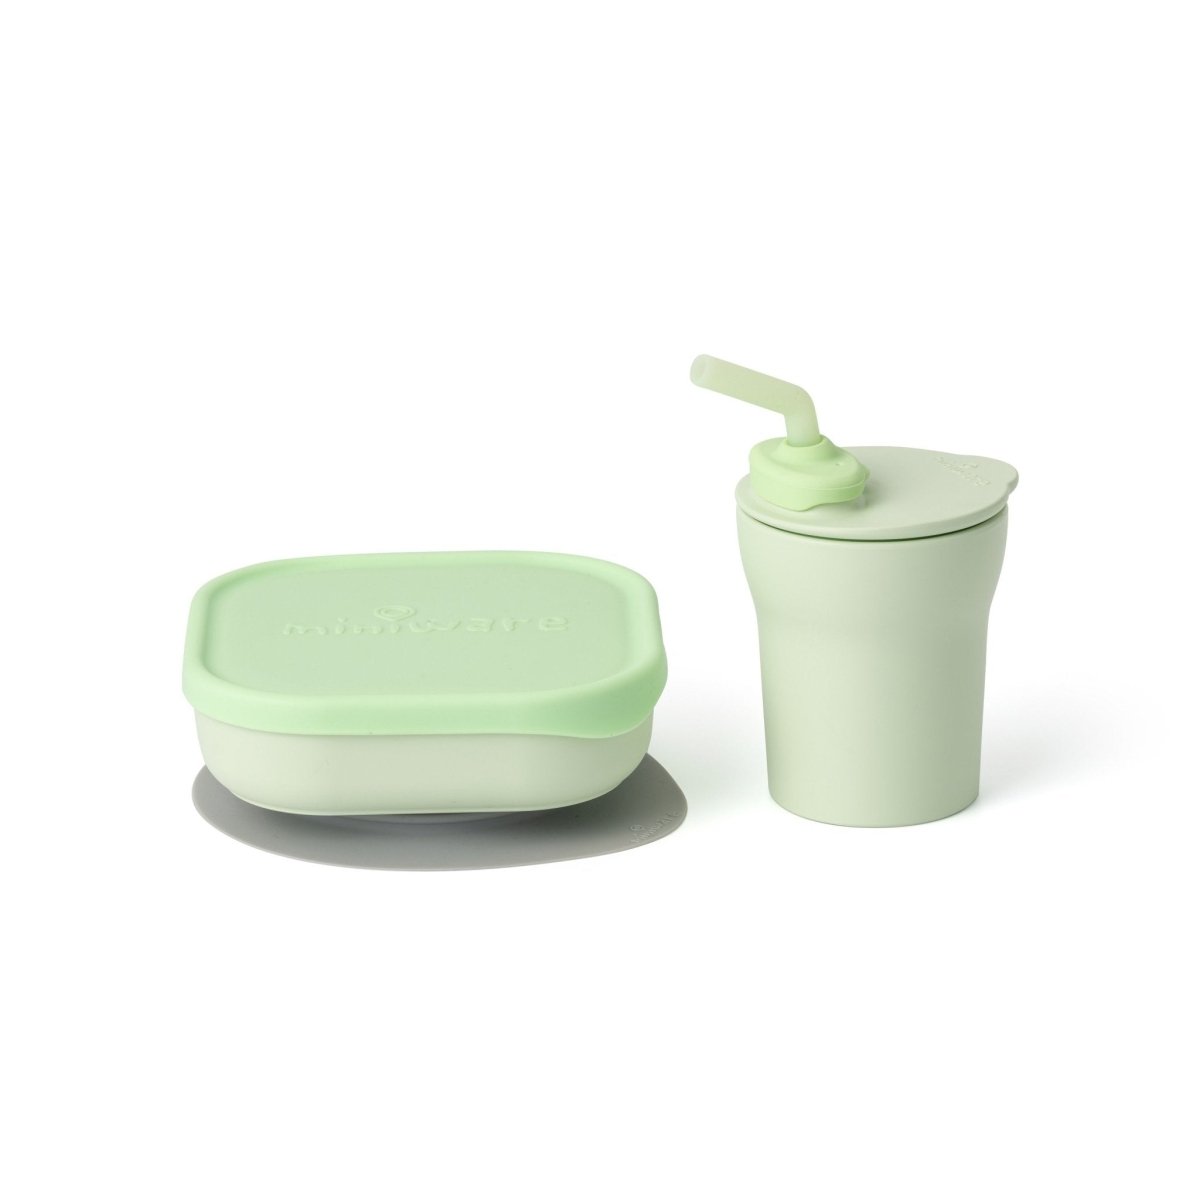 Miniware Suction Bowl with Sippy Cup - Vanilla/Lime - MWSKVK